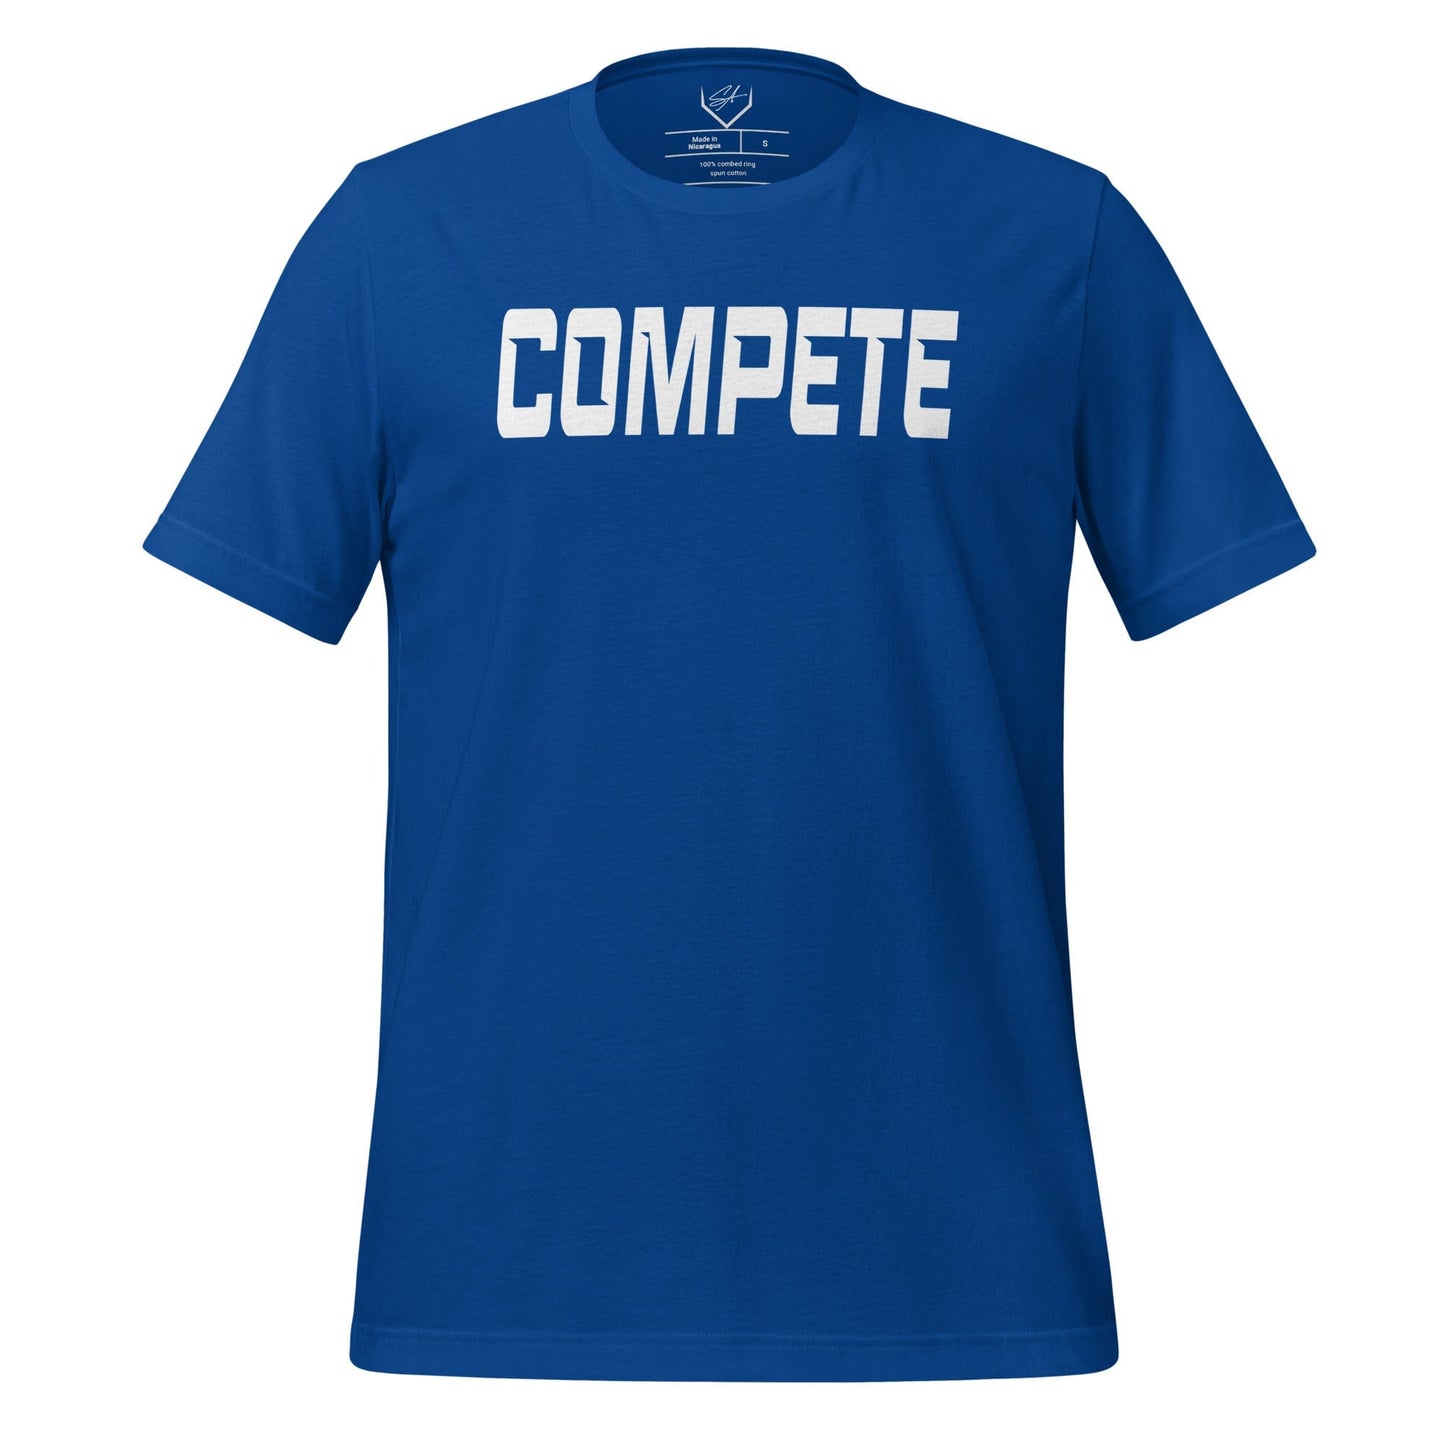 Compete - Adult Tee